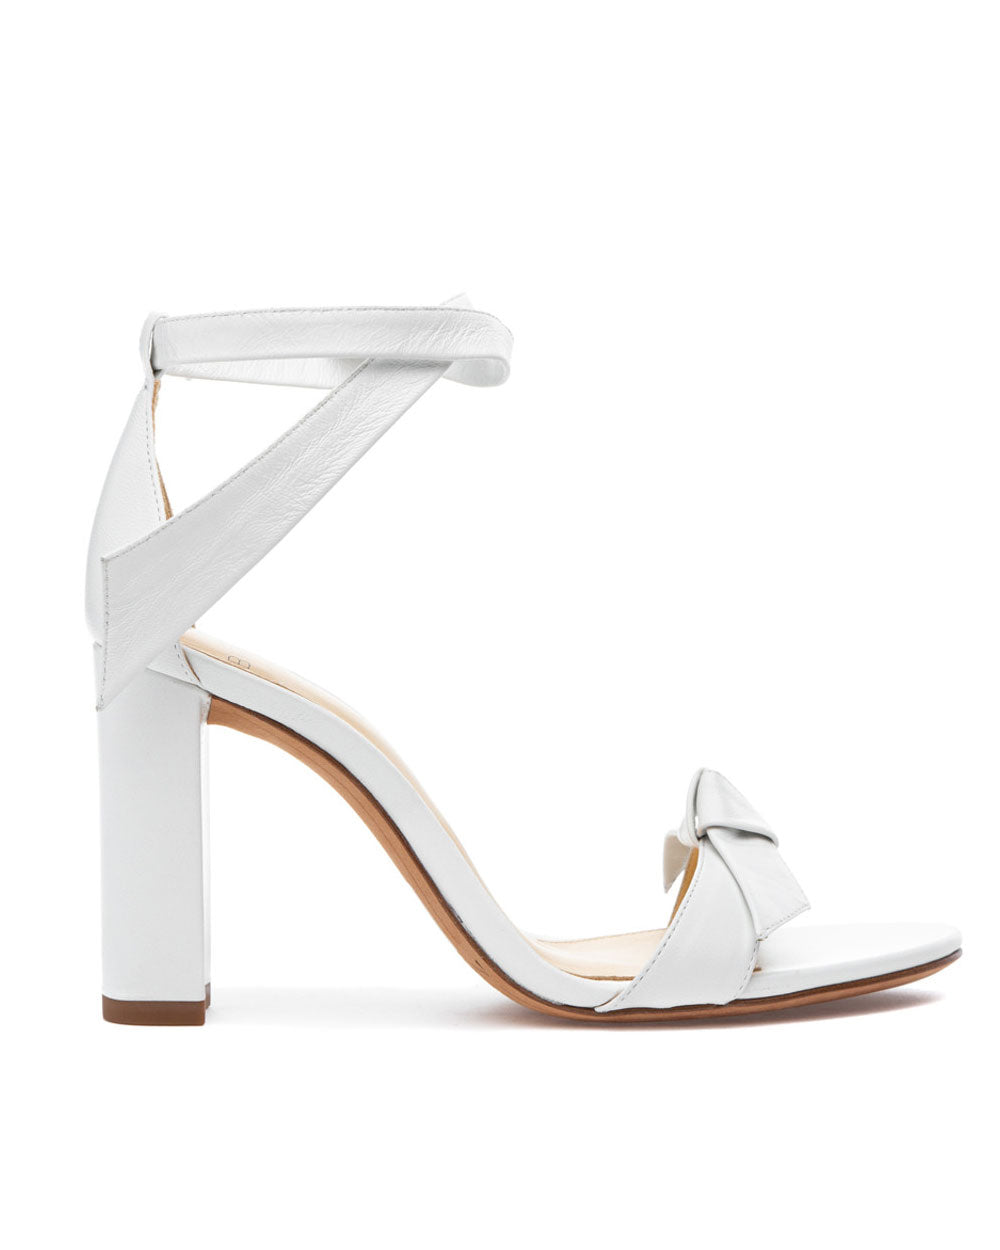 Clarita 90 Bow Leather Sandal in White